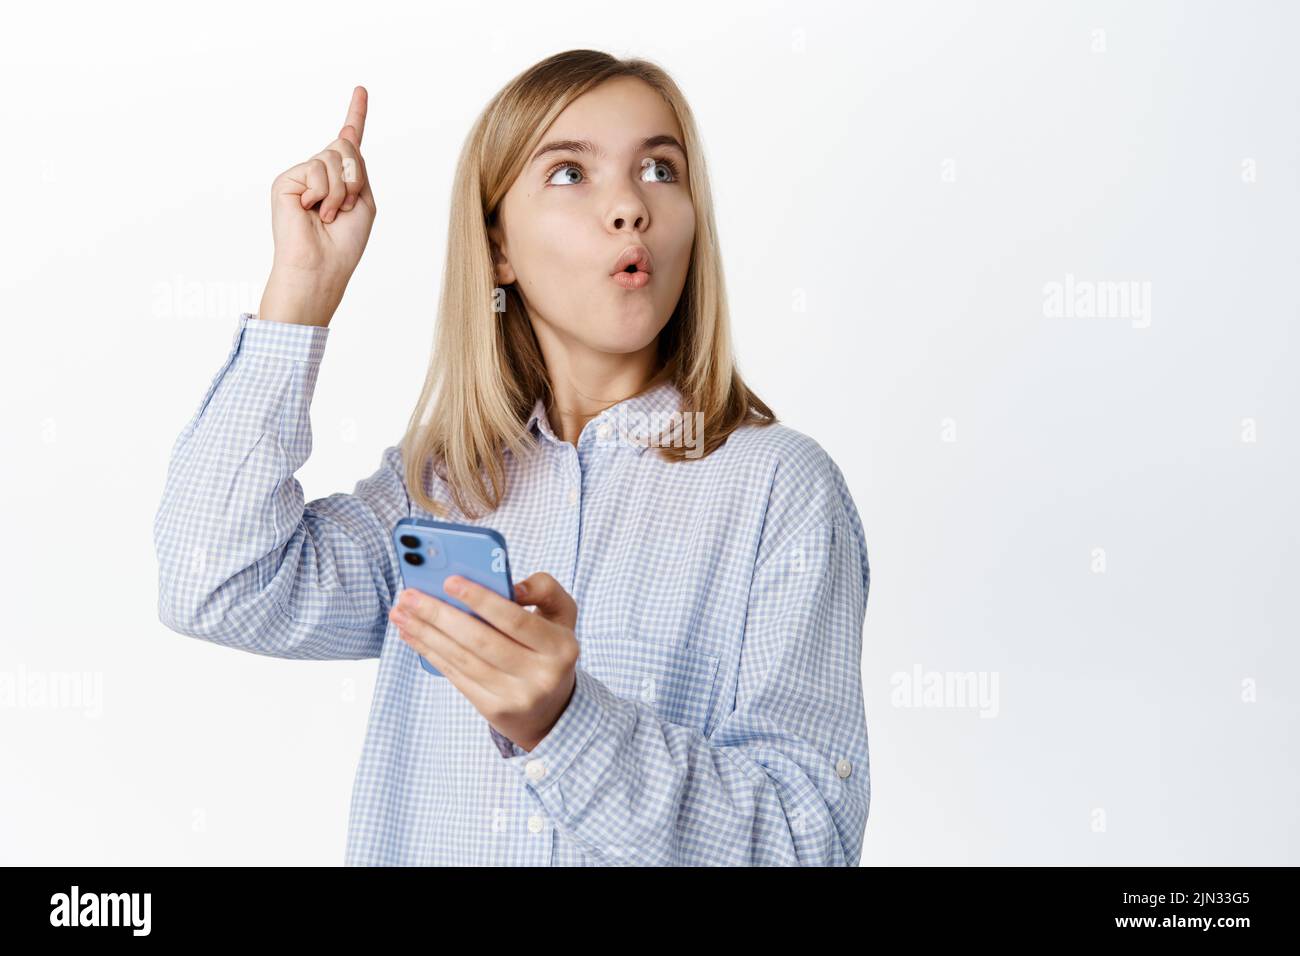 Enthusiastic little girl, child in casual clothes, raising finger up, idea eureka gesture, using mobile phone app, smartphone application for kids Stock Photo